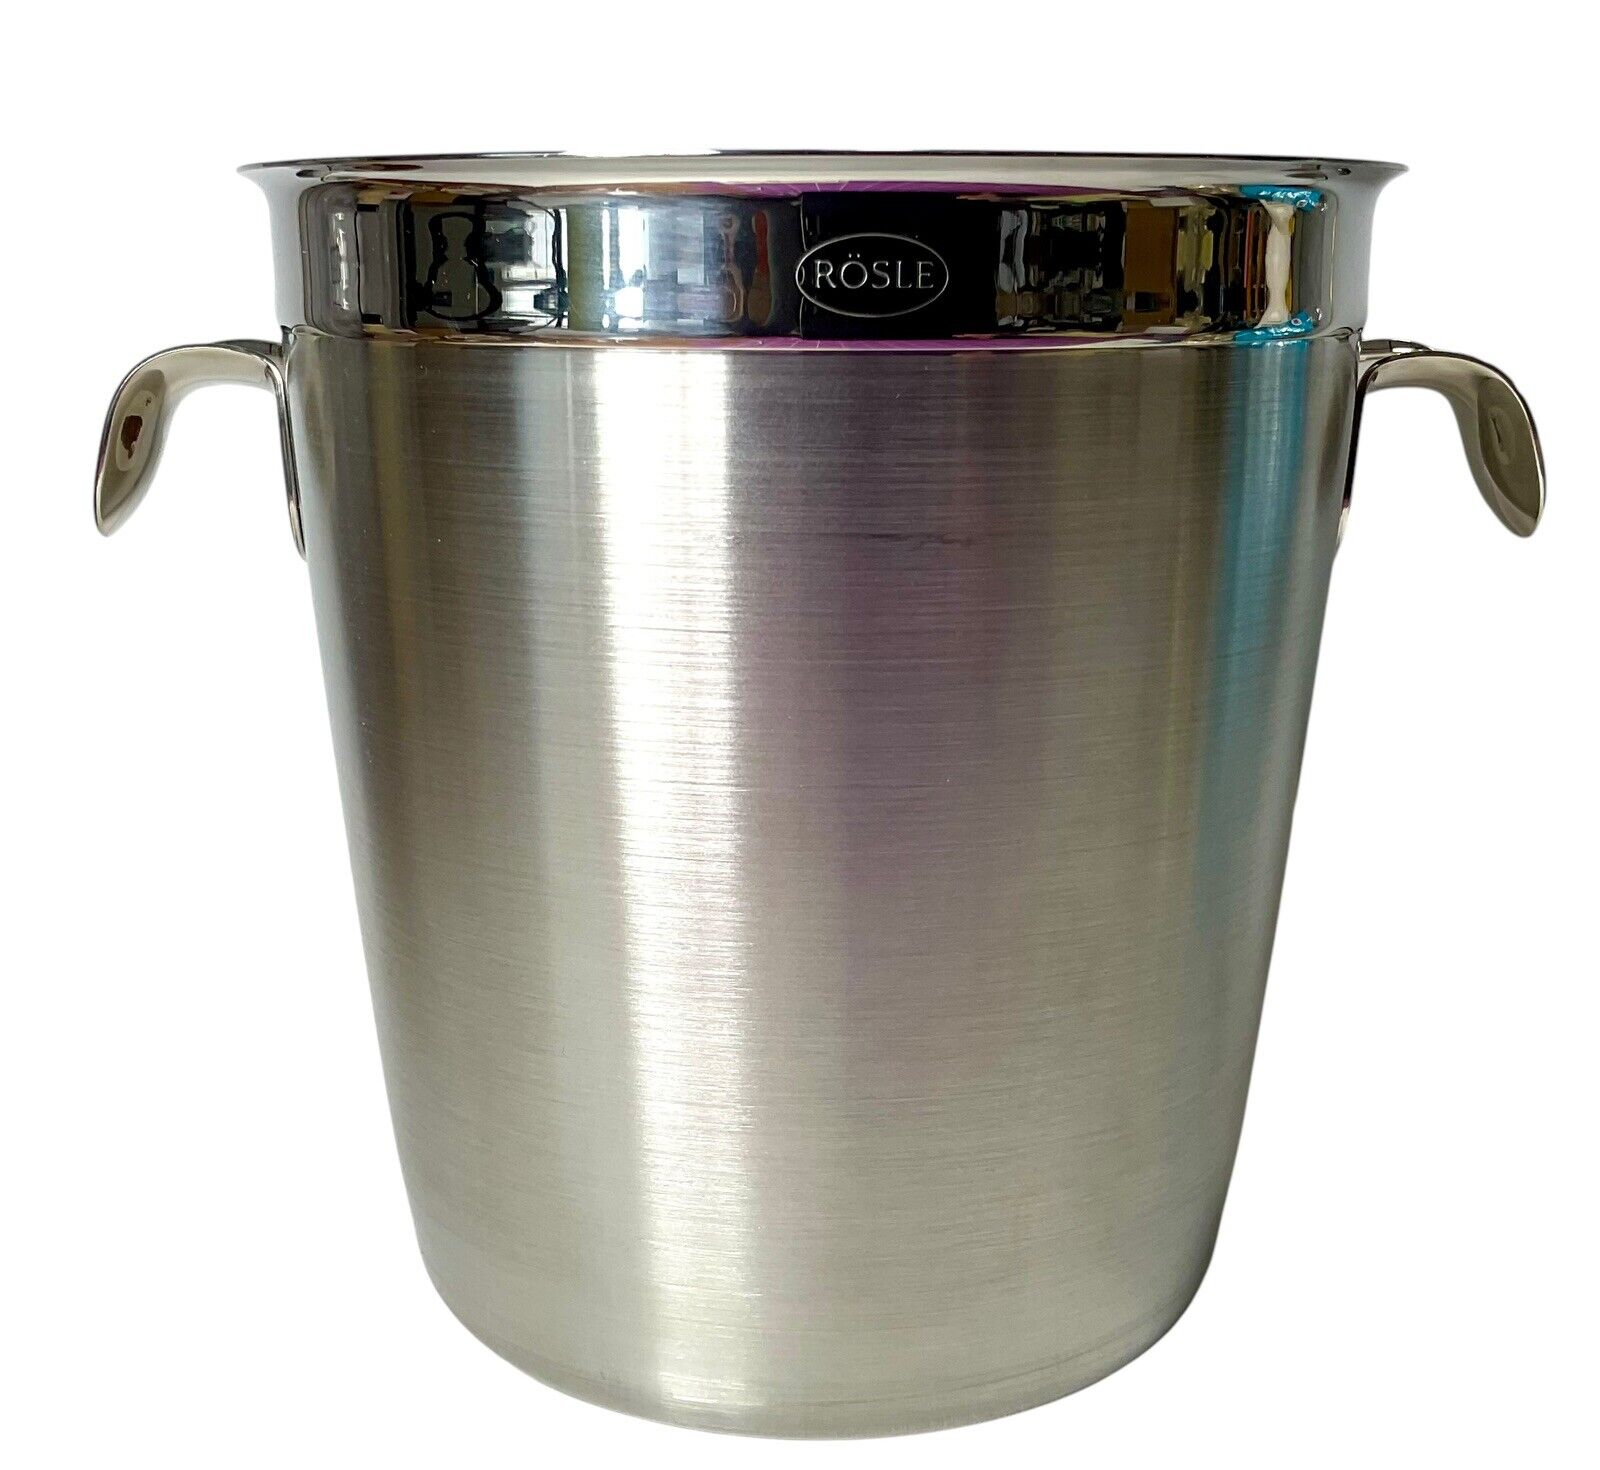 Vintage Williams Sonoma 18/10 Stainless Steel Champagne Bucket Wine Cooler